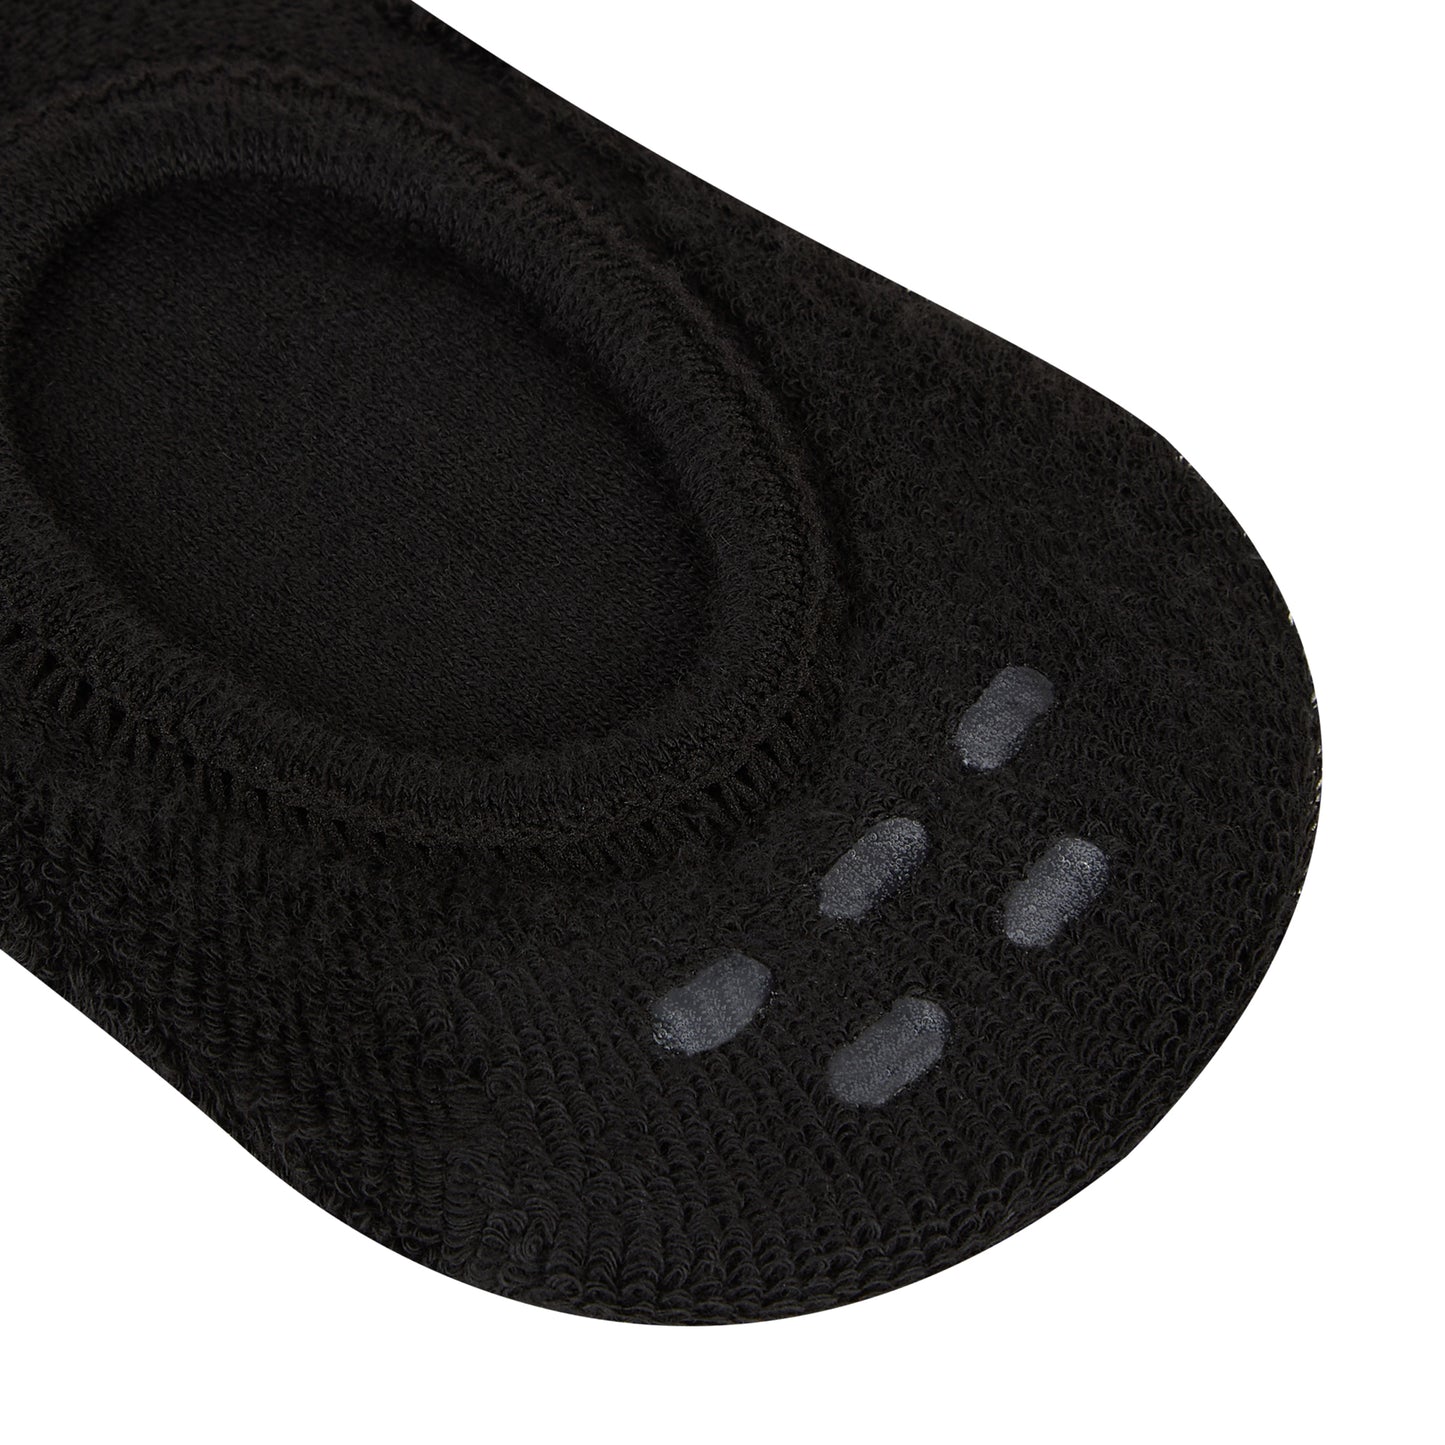 IDENTITY Apparel Performance Enhancing Moisture-Wicking Active Wear Invisible Foot Socks with Arch Support